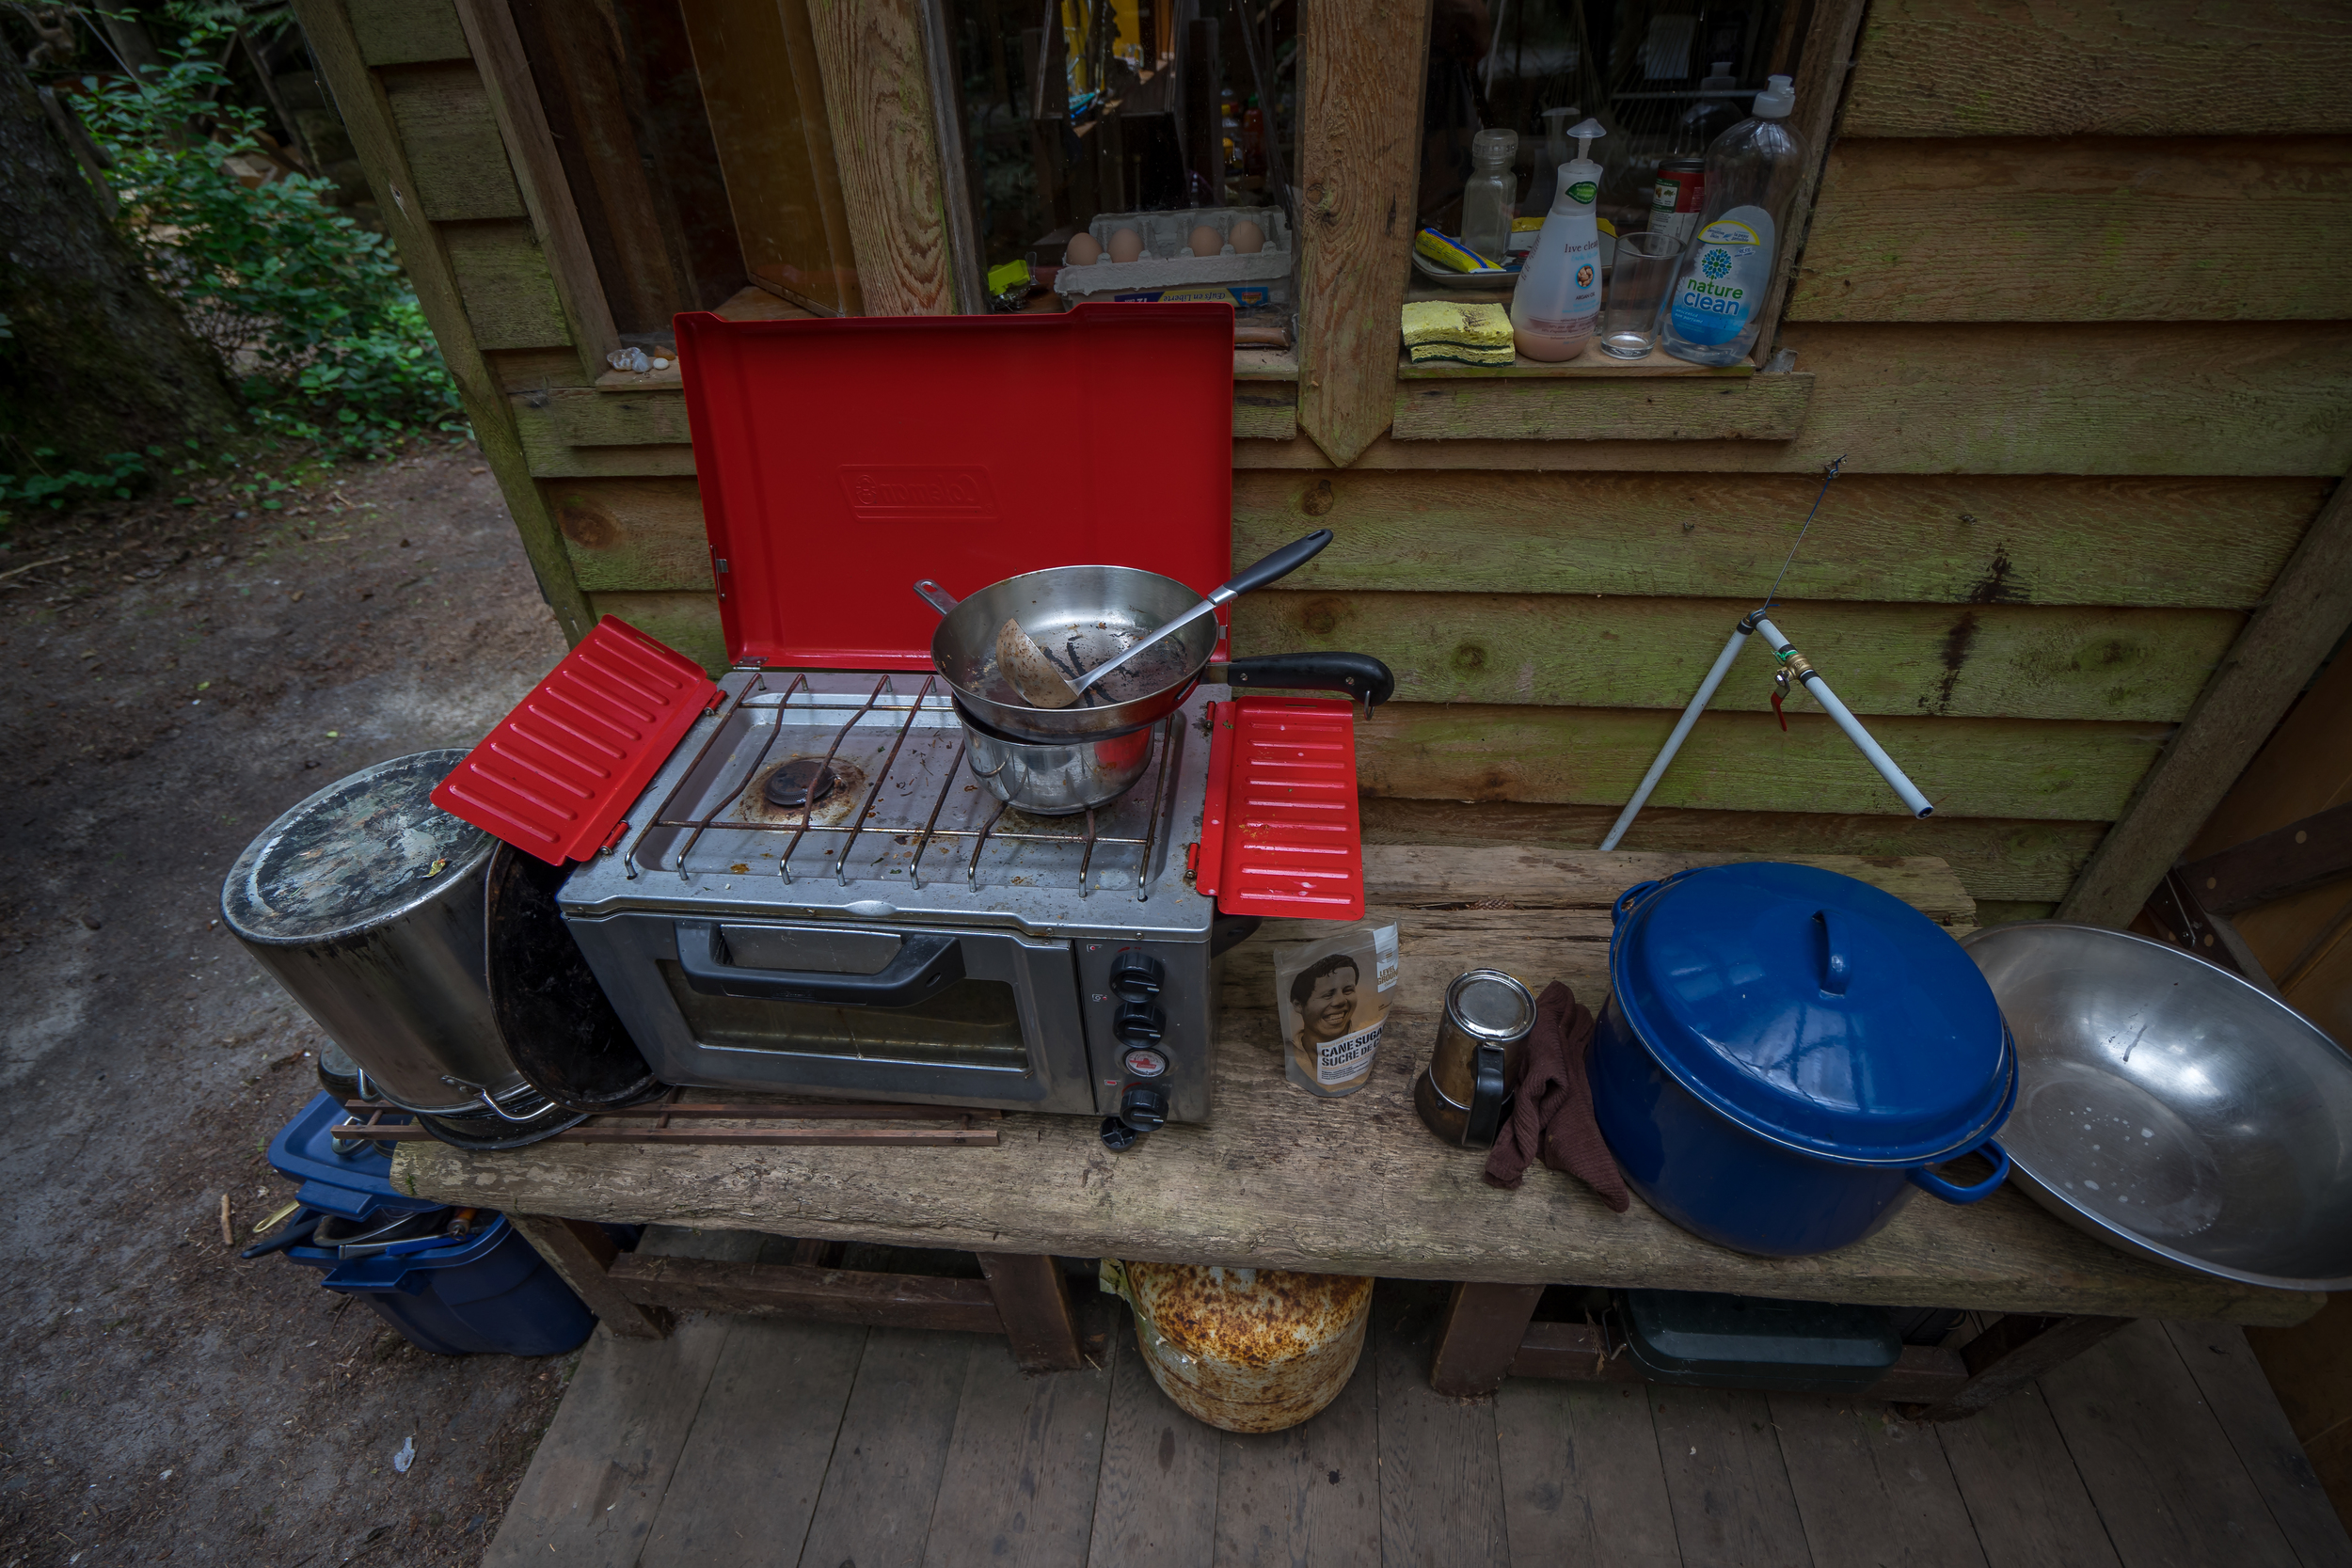  A combination of propane powered camping stoves and wood burning ovens and stoves allow the residents to cook their meals. 